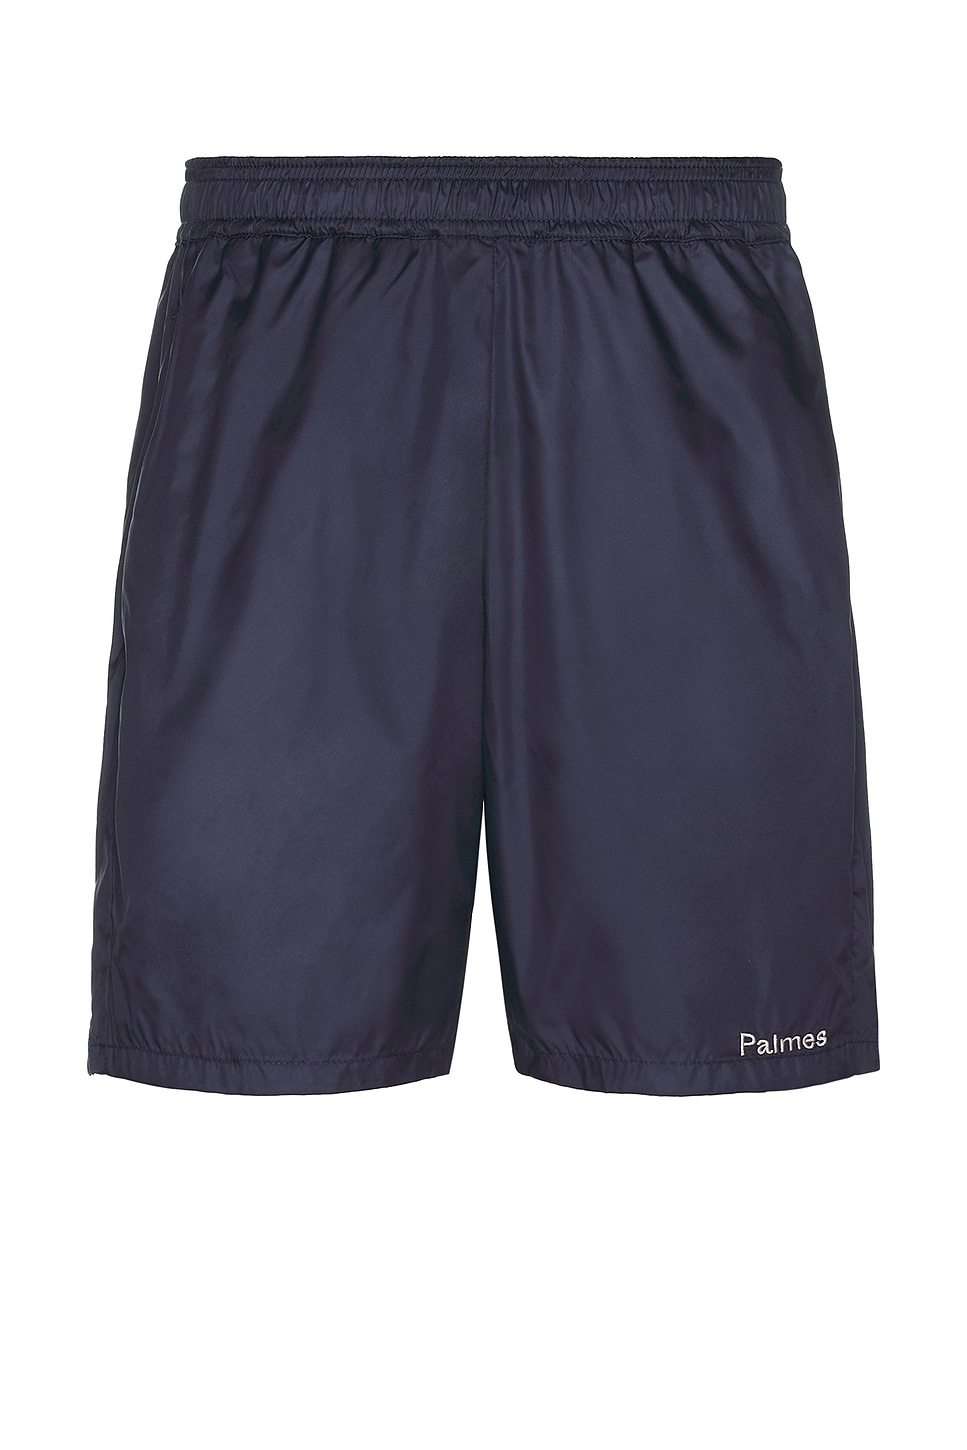 Image 1 of Palmes Middle Shorts in Navy